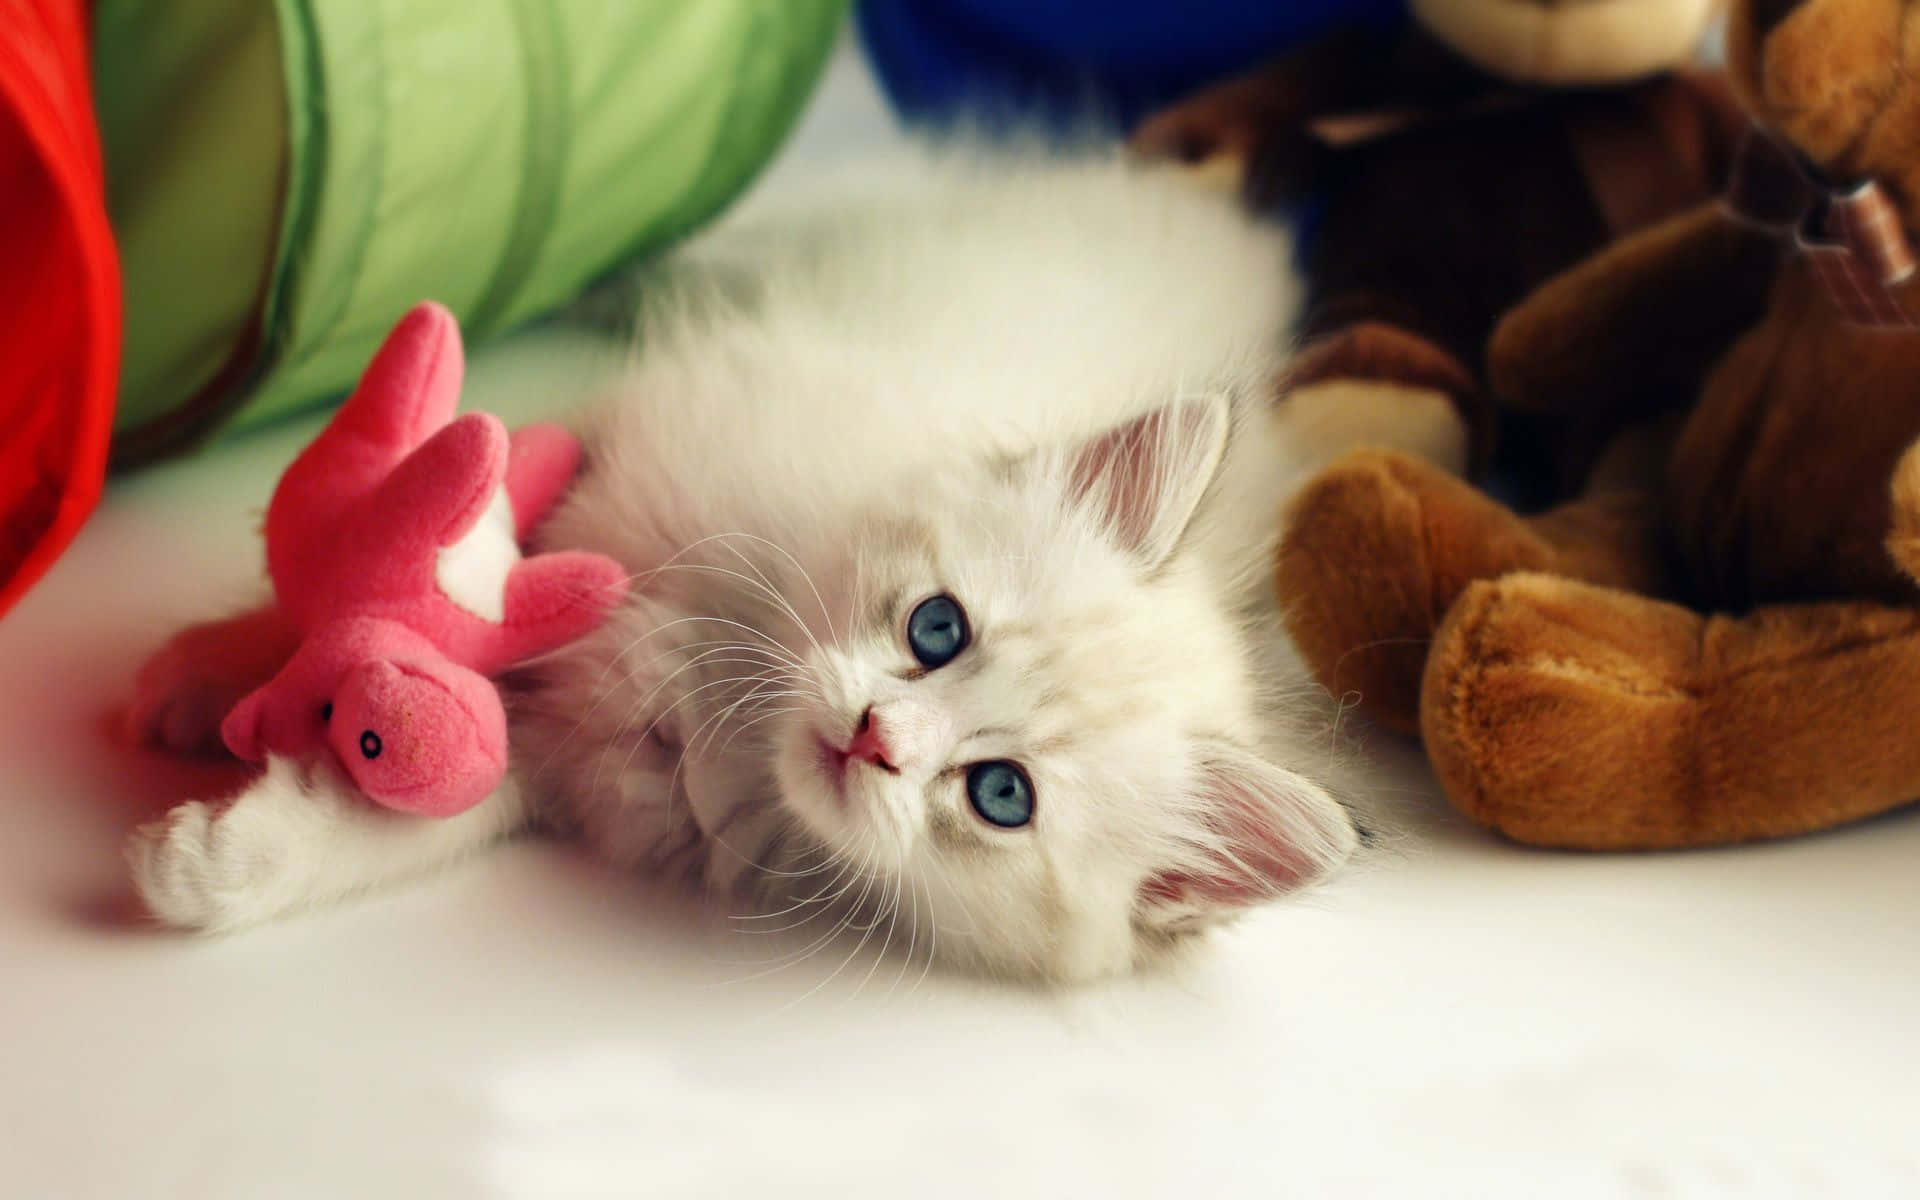 Cute HD 1920x1200 Background: A Playful and Adorable Kitten